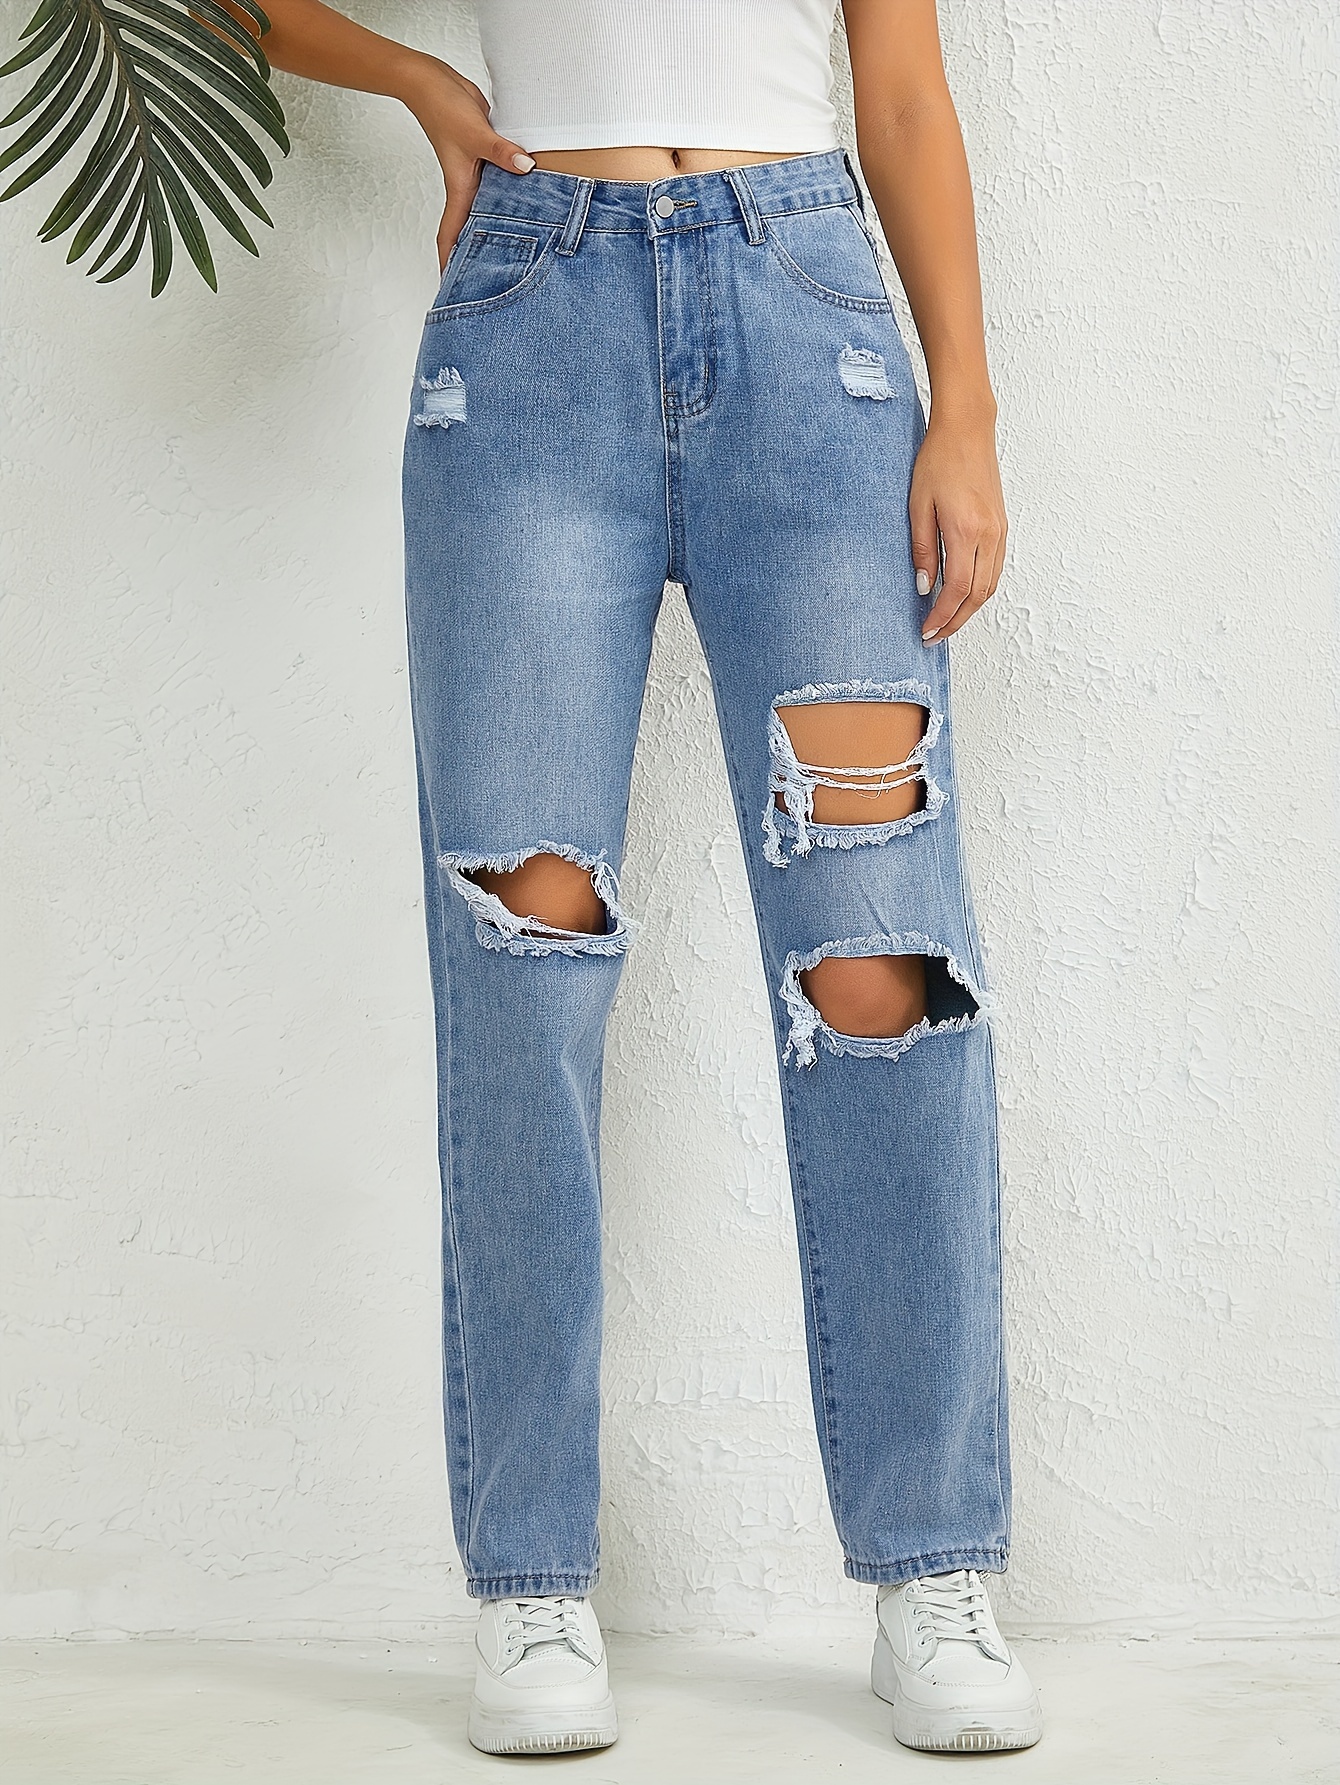 Women's High Waisted Ripped Pants Straight Denim Jeans Casual